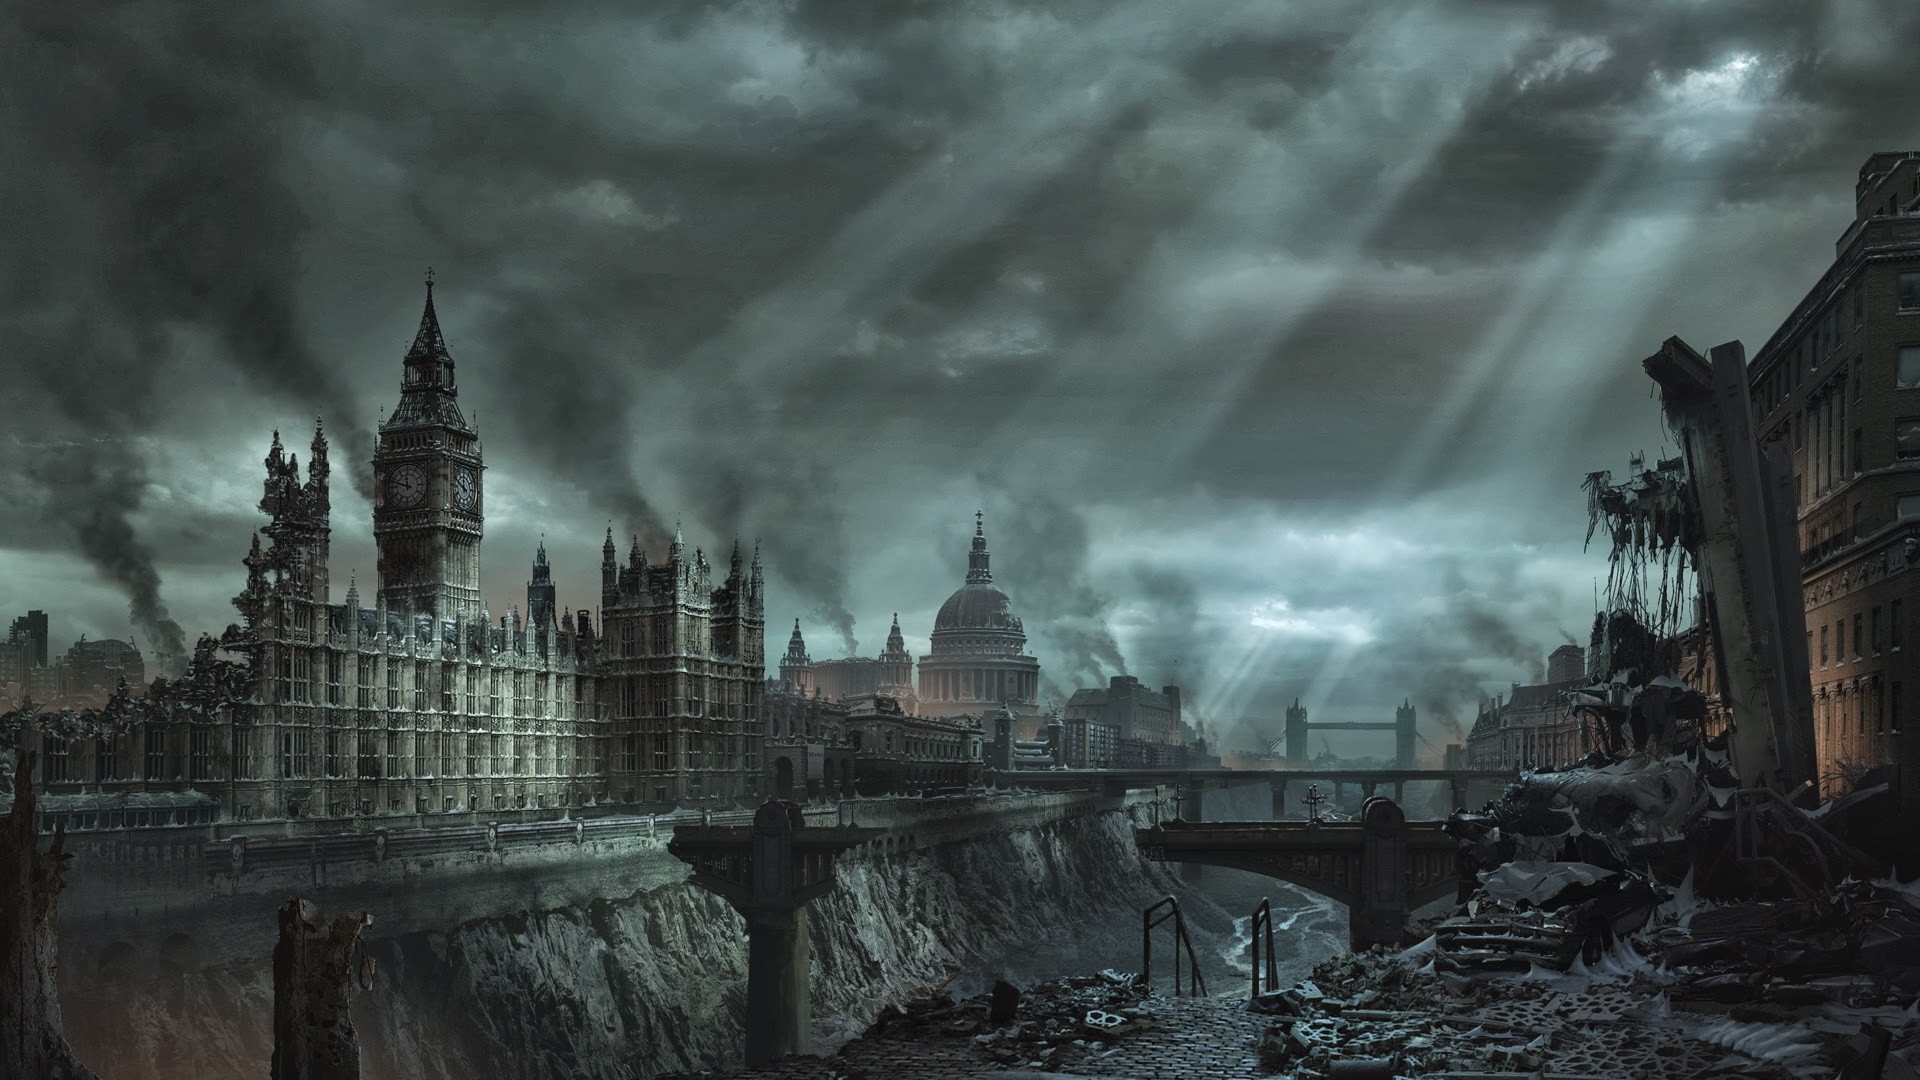 General 1920x1080 London apocalyptic Hellgate London video games PC gaming video game art